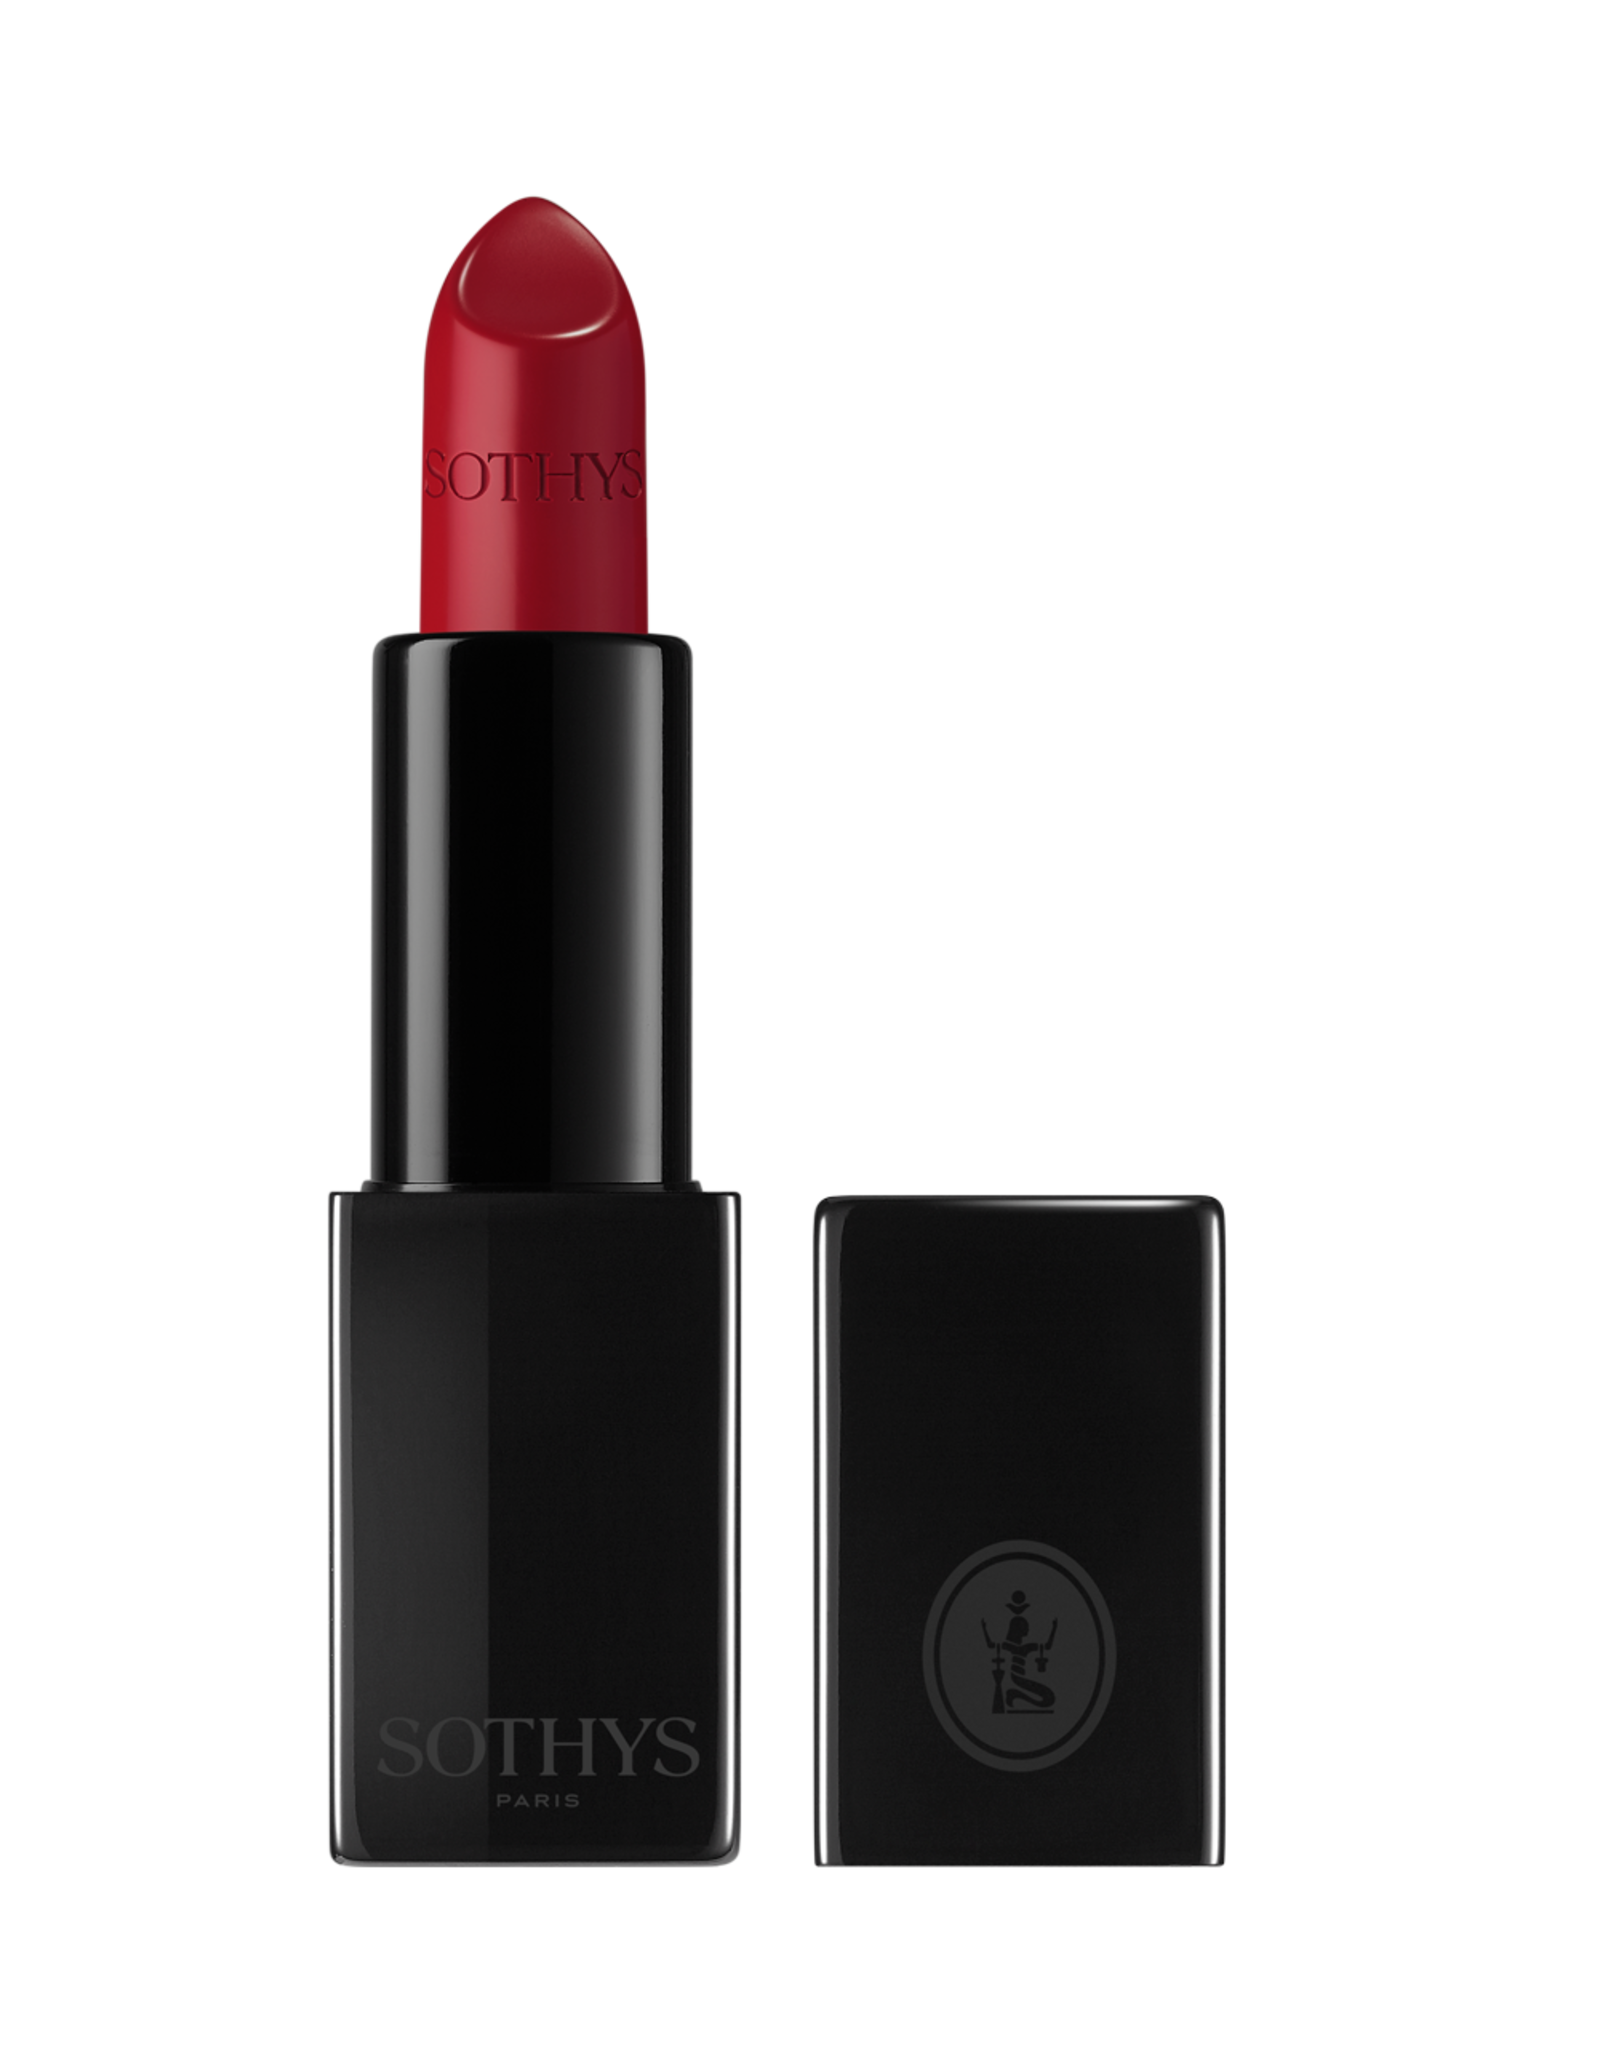 SOTHYS -30% Make-up Look Herbst / Winter 2021 - Rouge